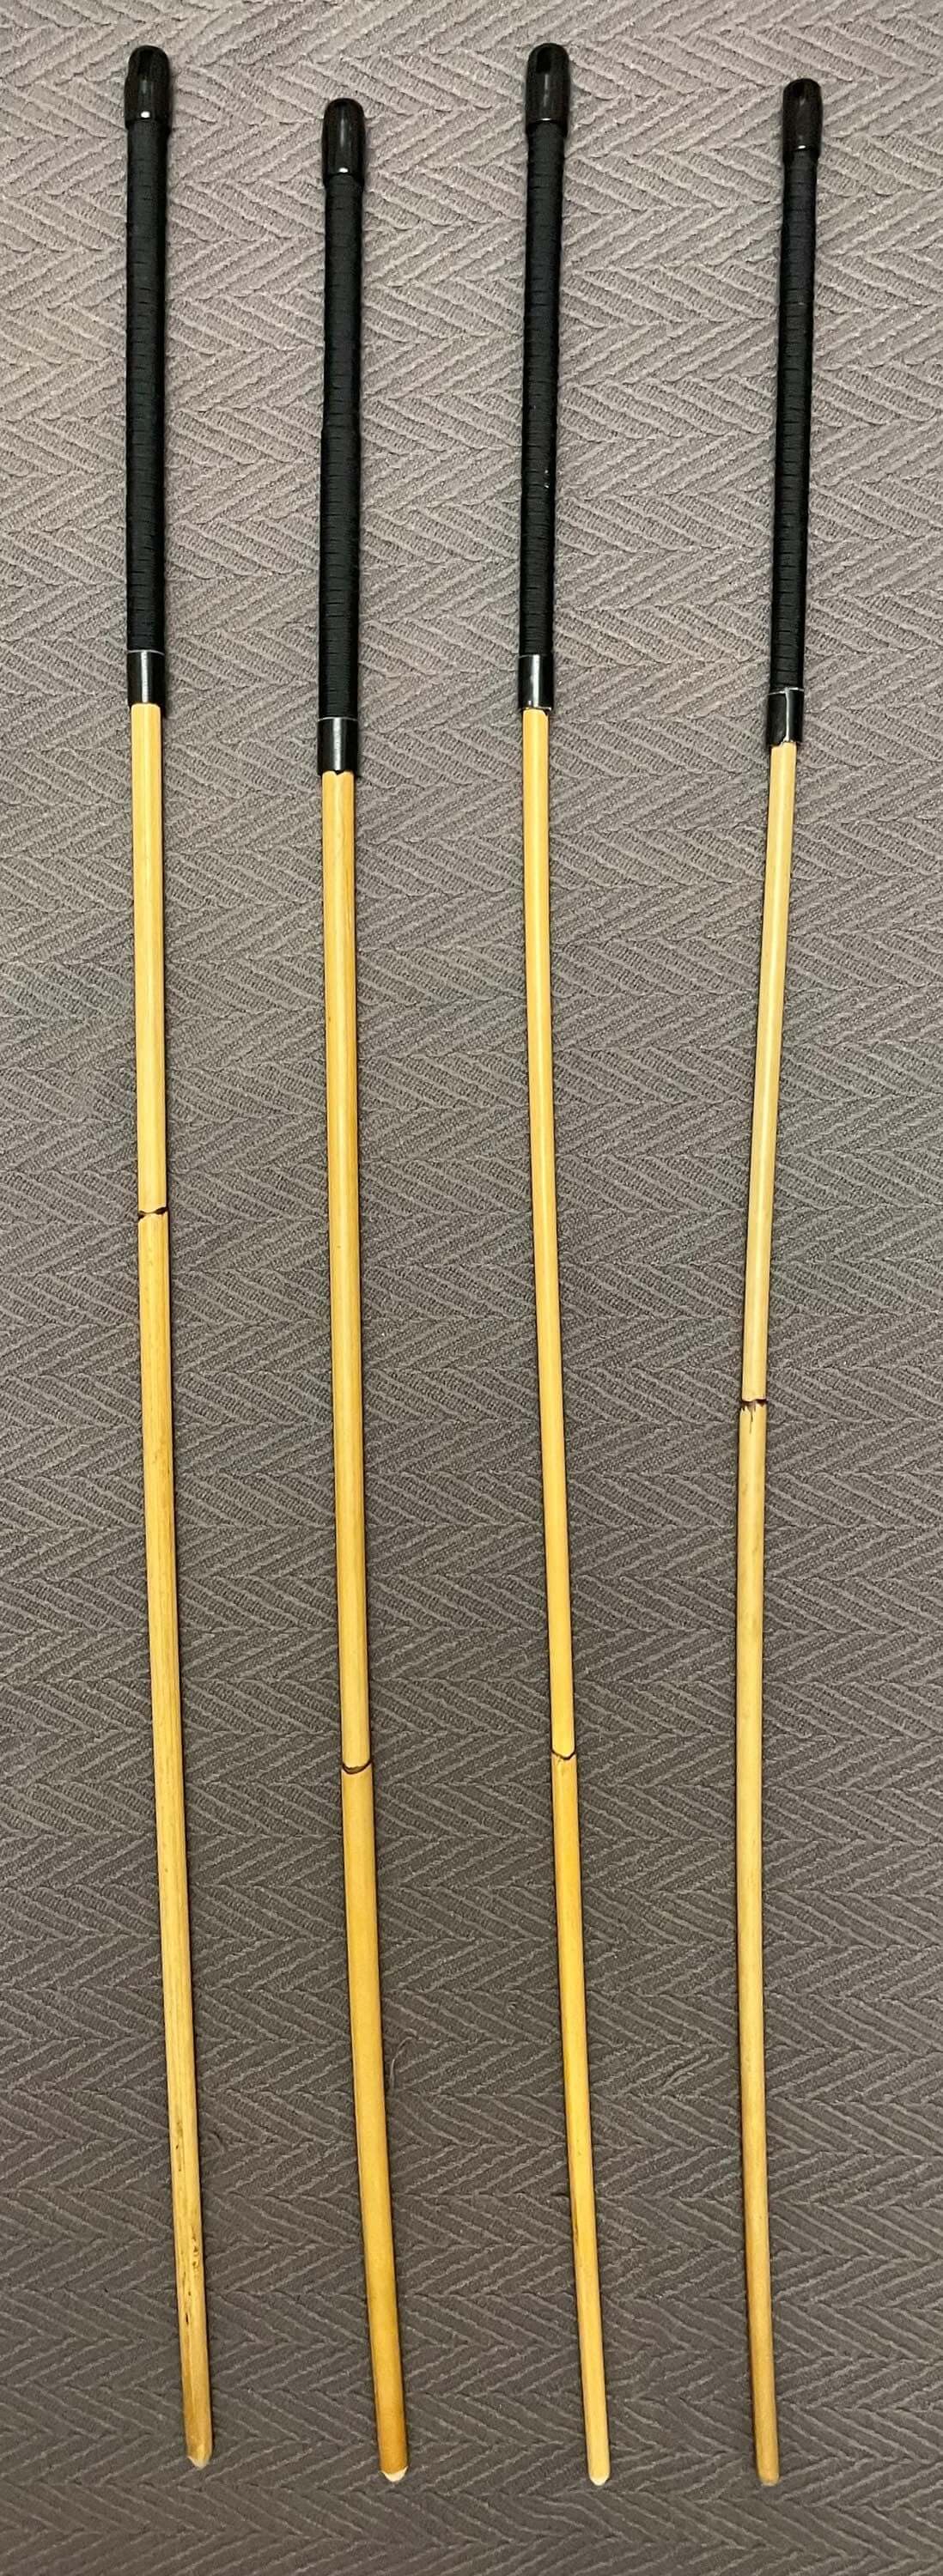 Set of 4 Dragon Canes with Black Paracord Handles